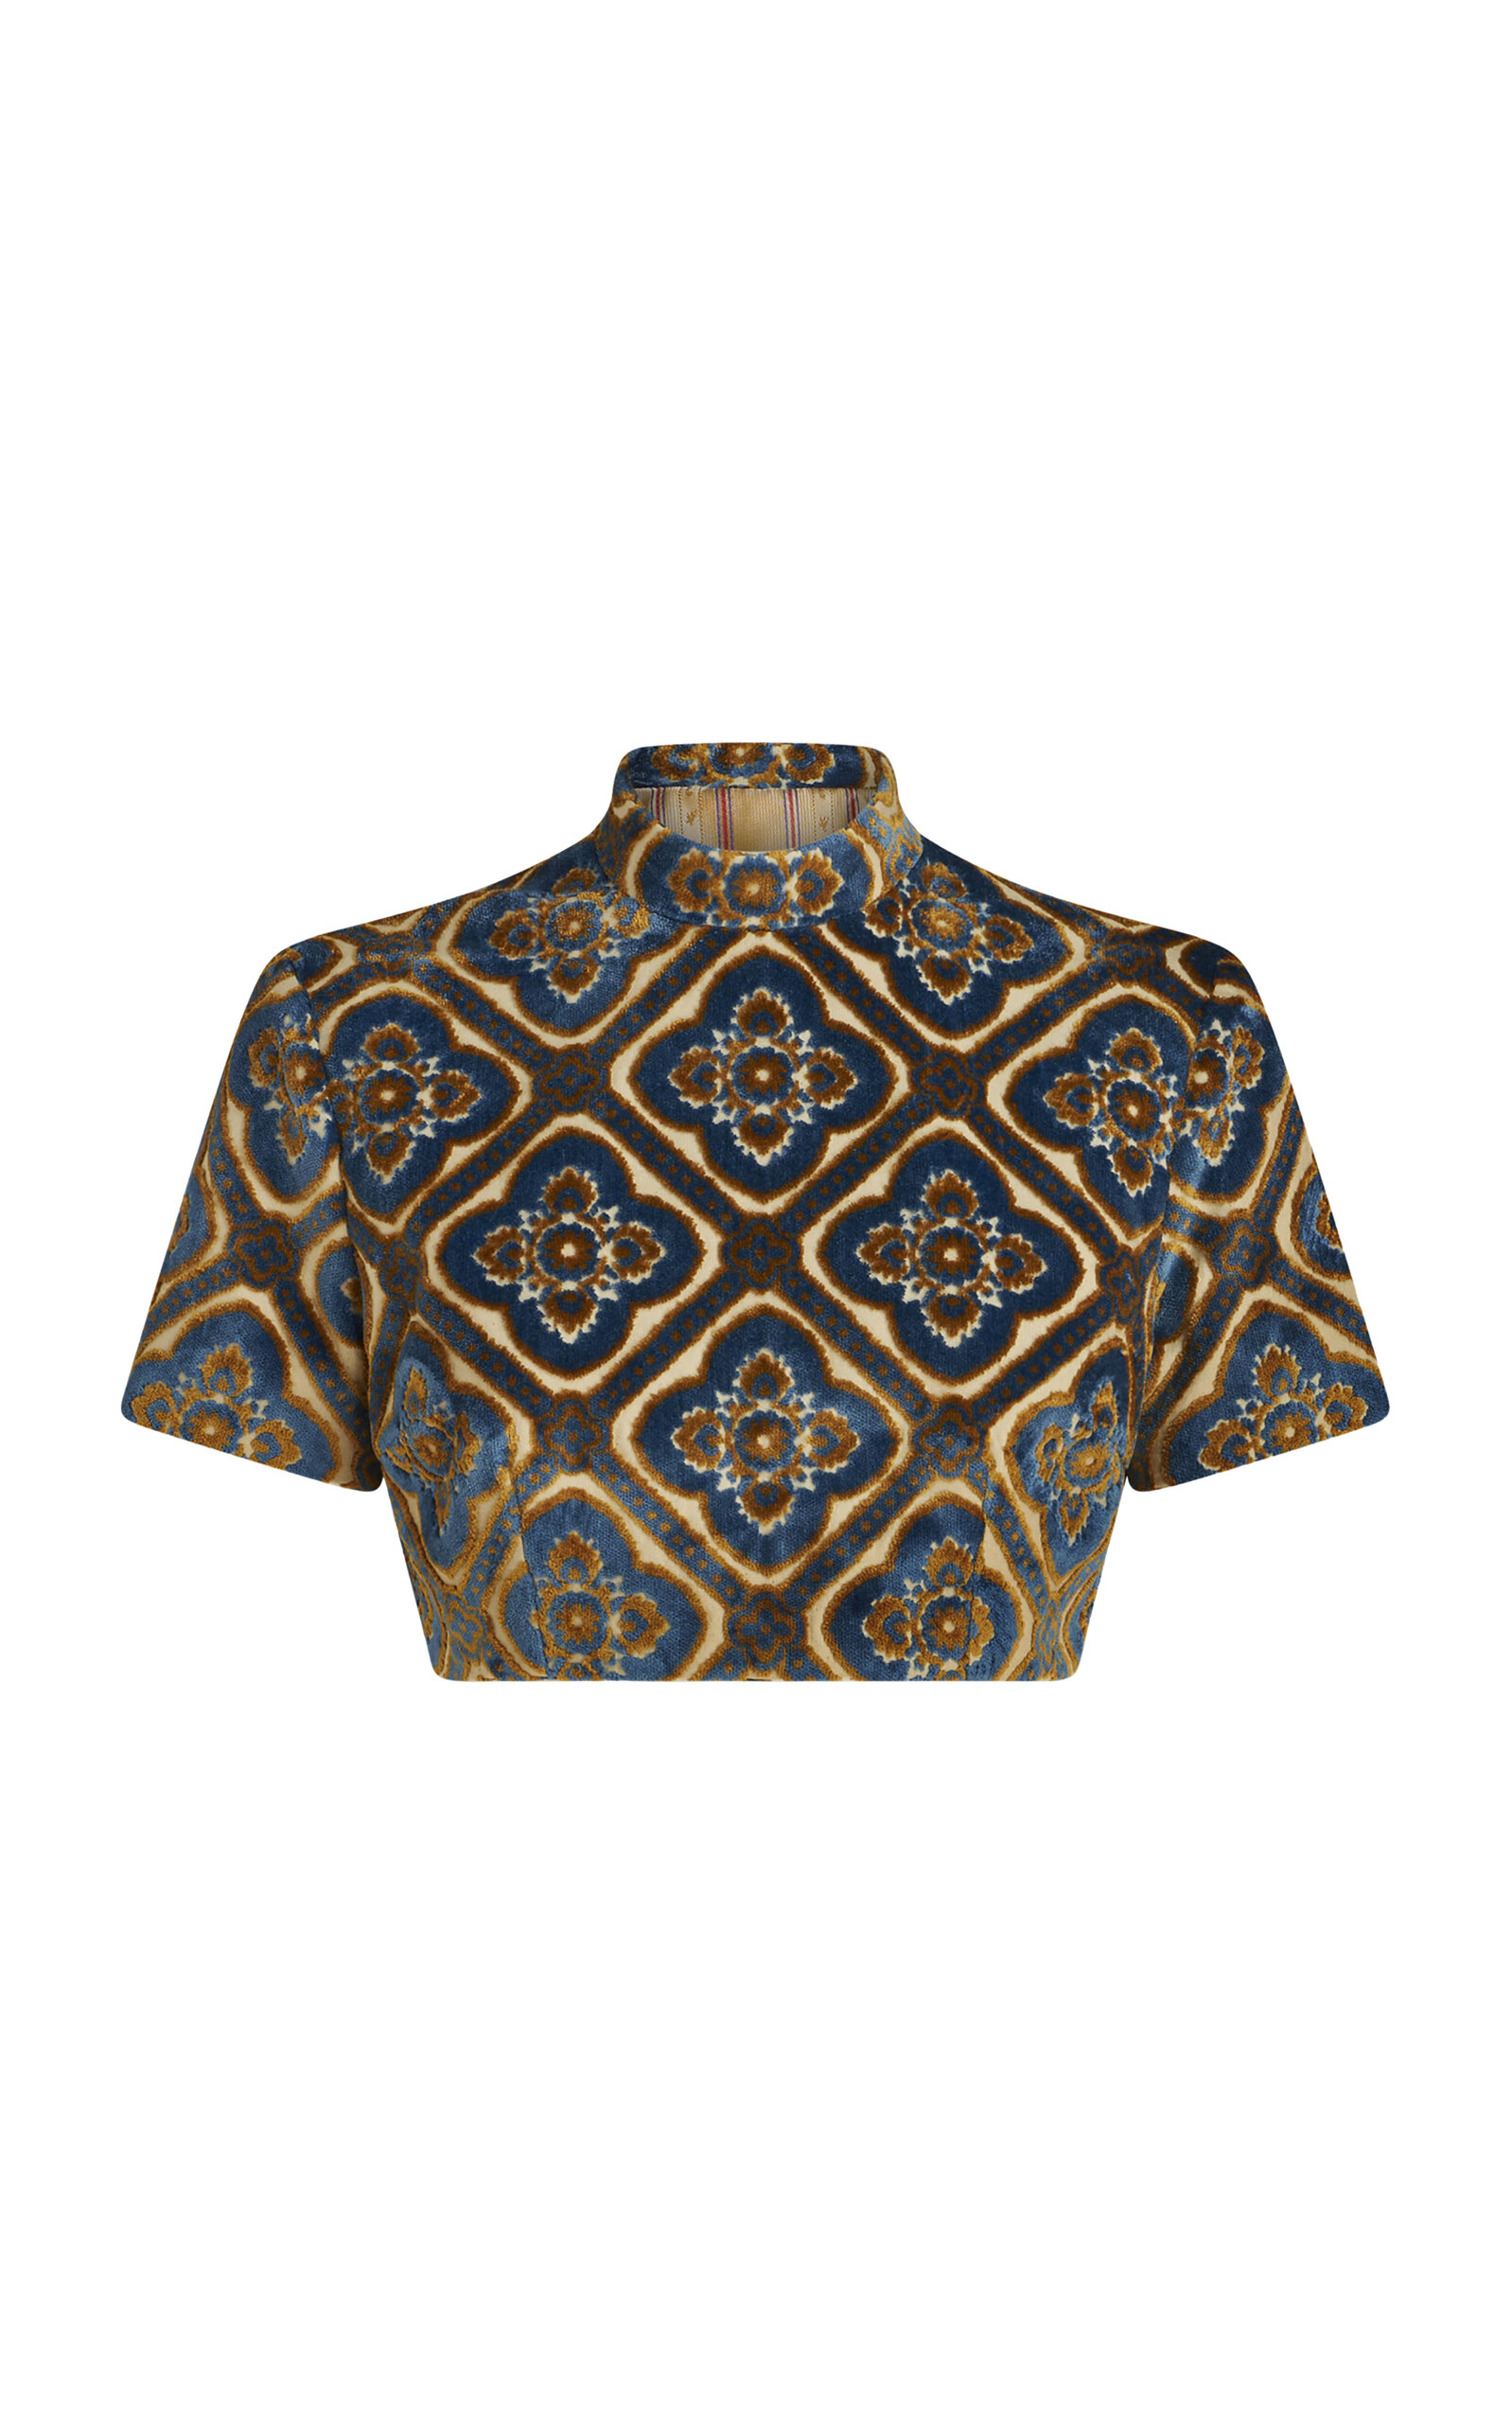 ETRO PRINTED CROPPED TOP